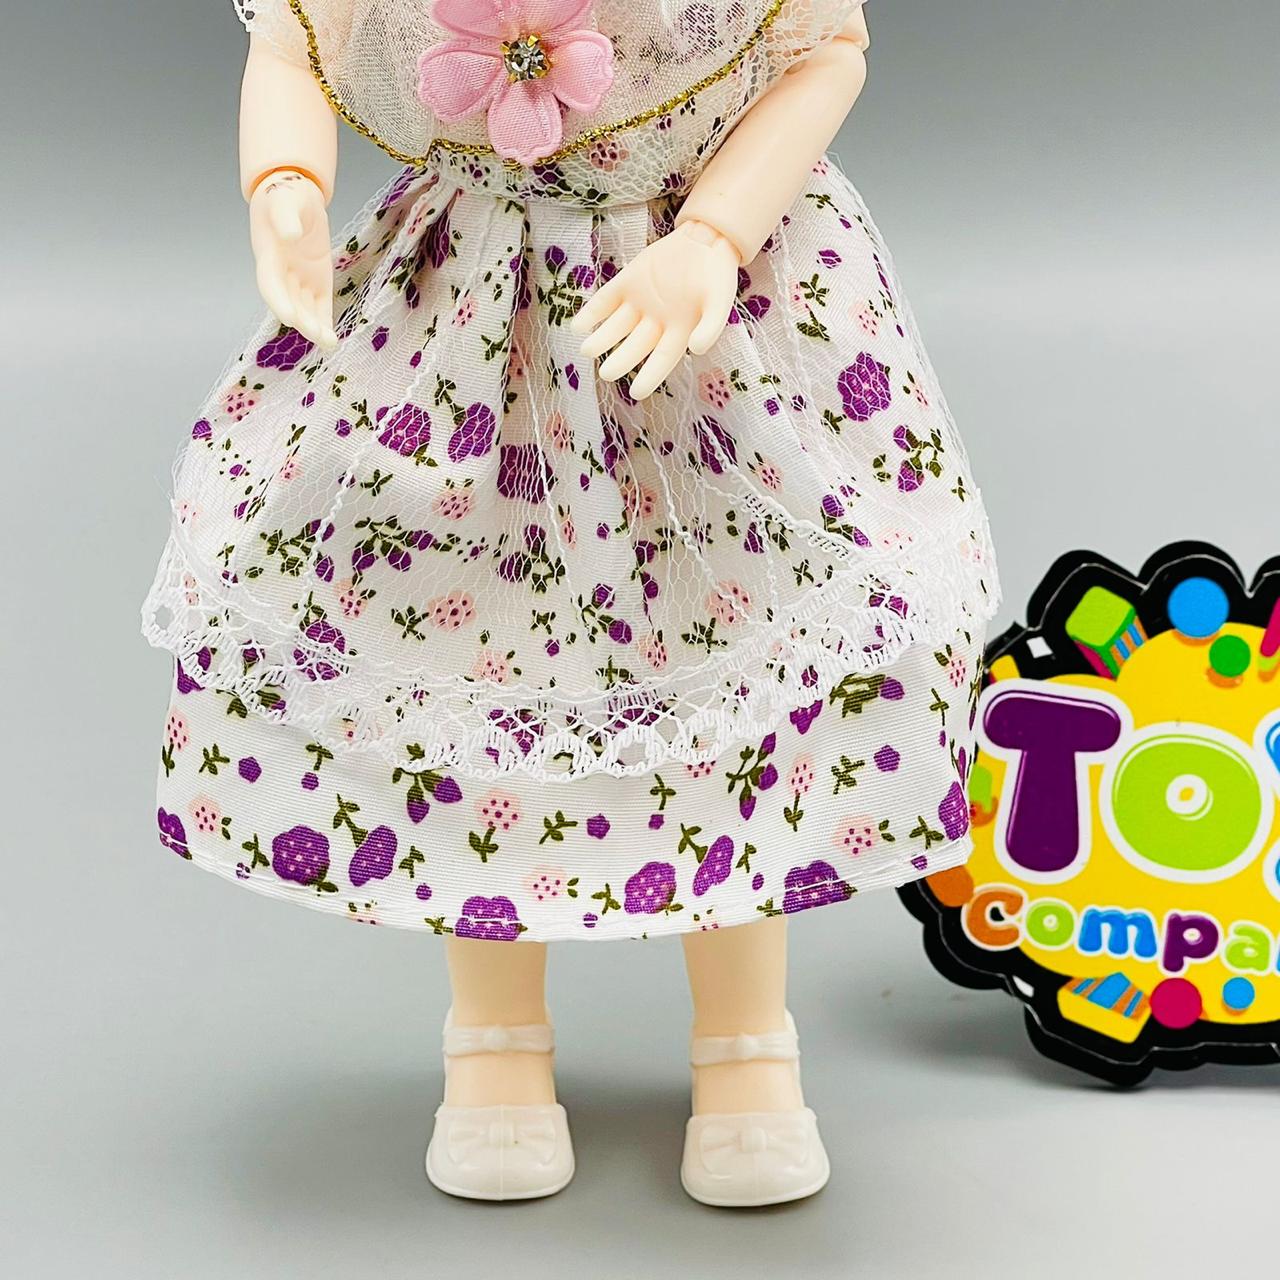 Movable Joints Fashion Doll - 10 Inches